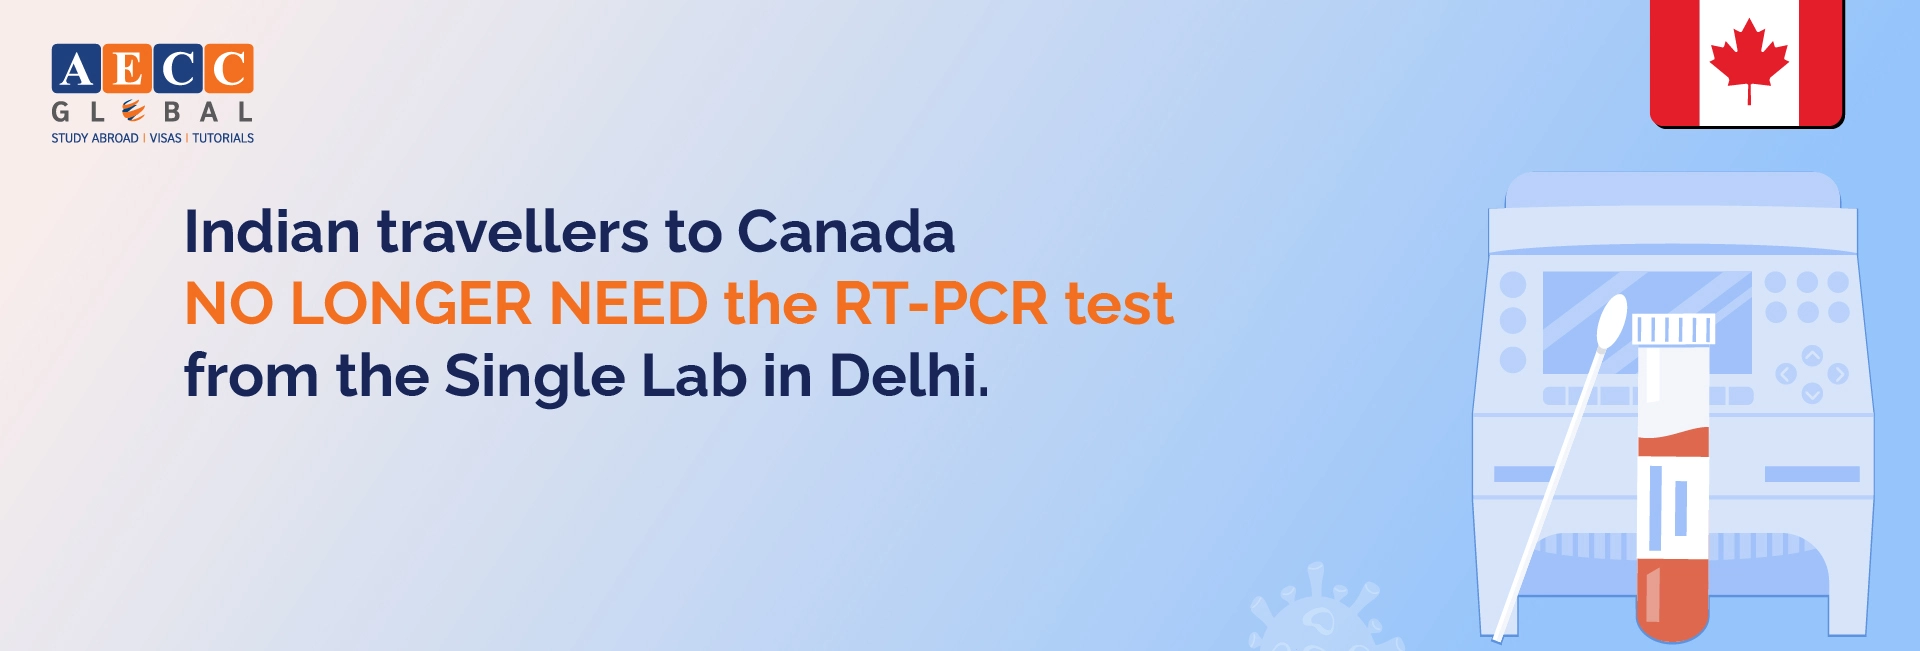 Indian Travellers to Canada NO LONGER NEED the RT-PCR test from the Single Lab in Delhi